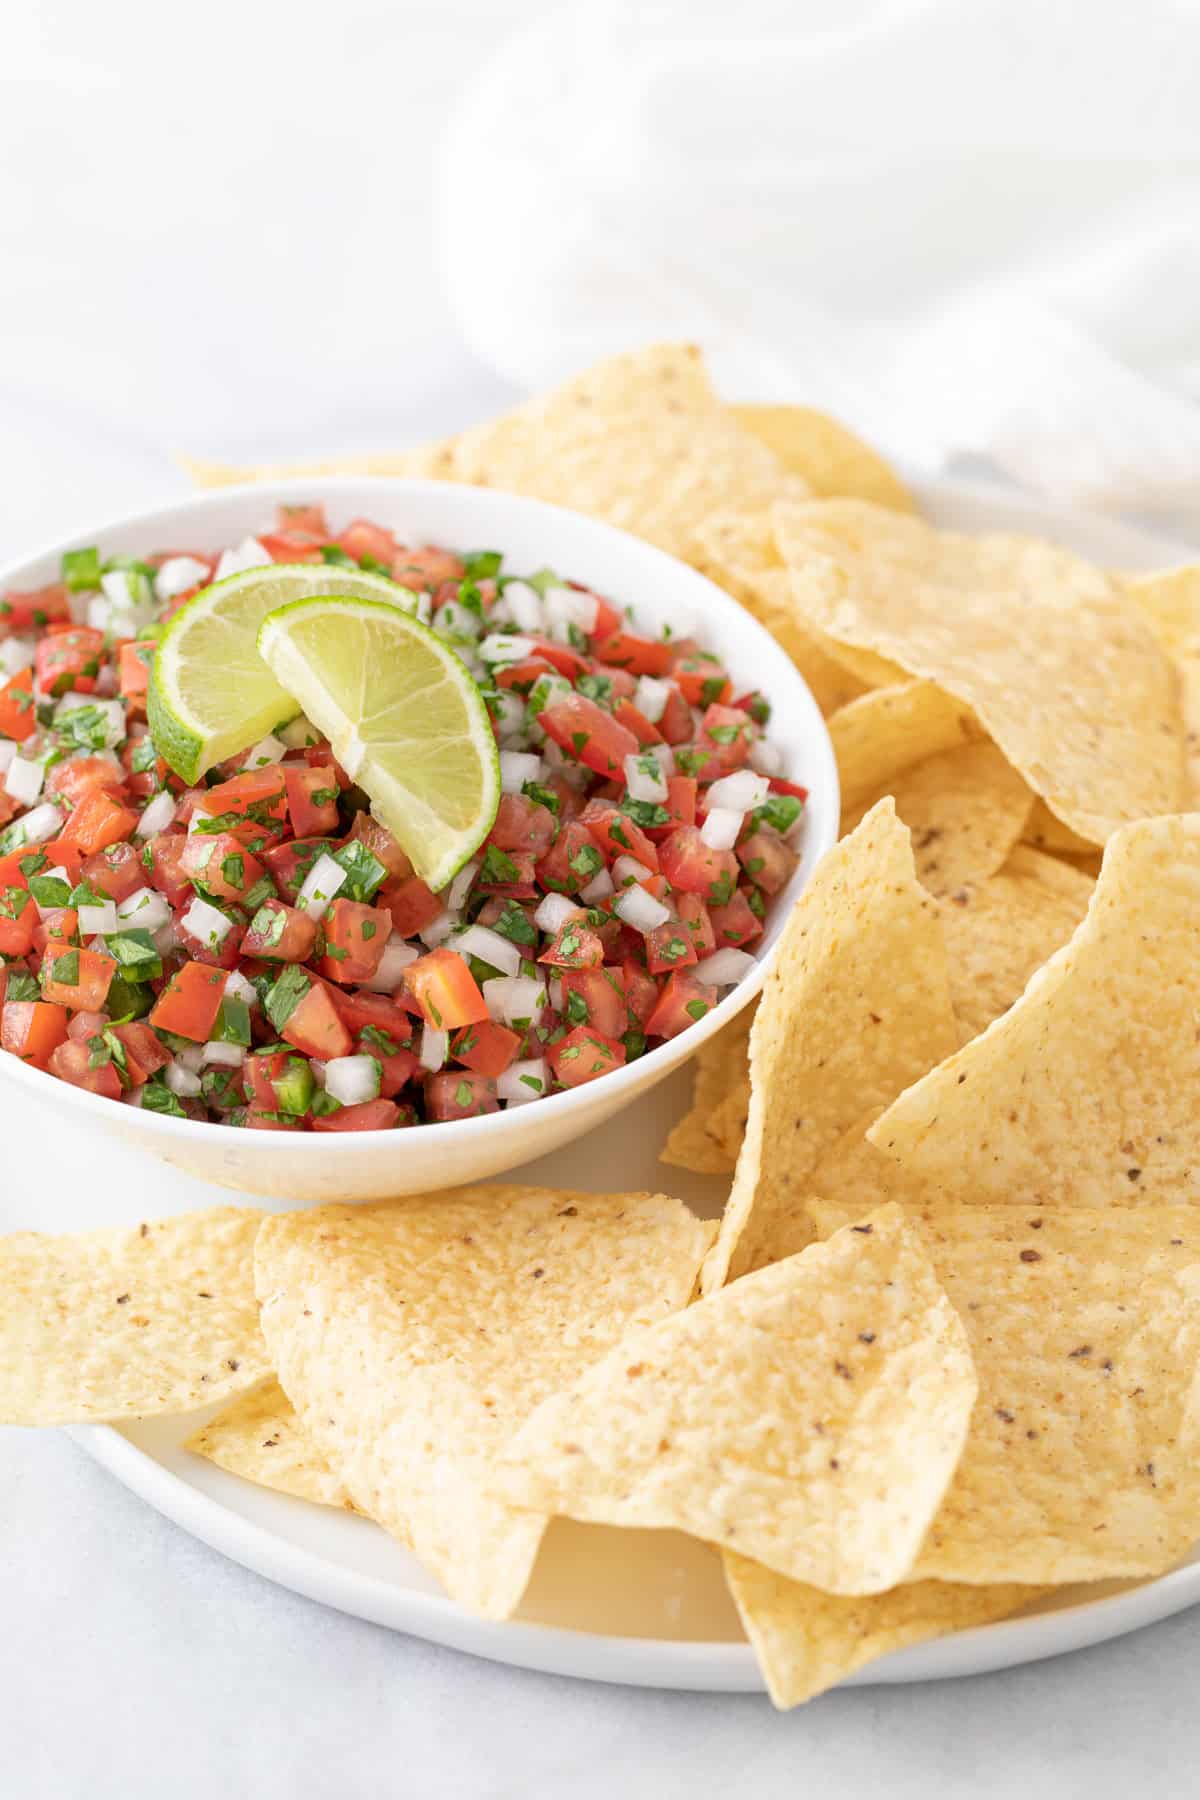 Pico de Gallo in a white bowl on a plate with tortilla chips.